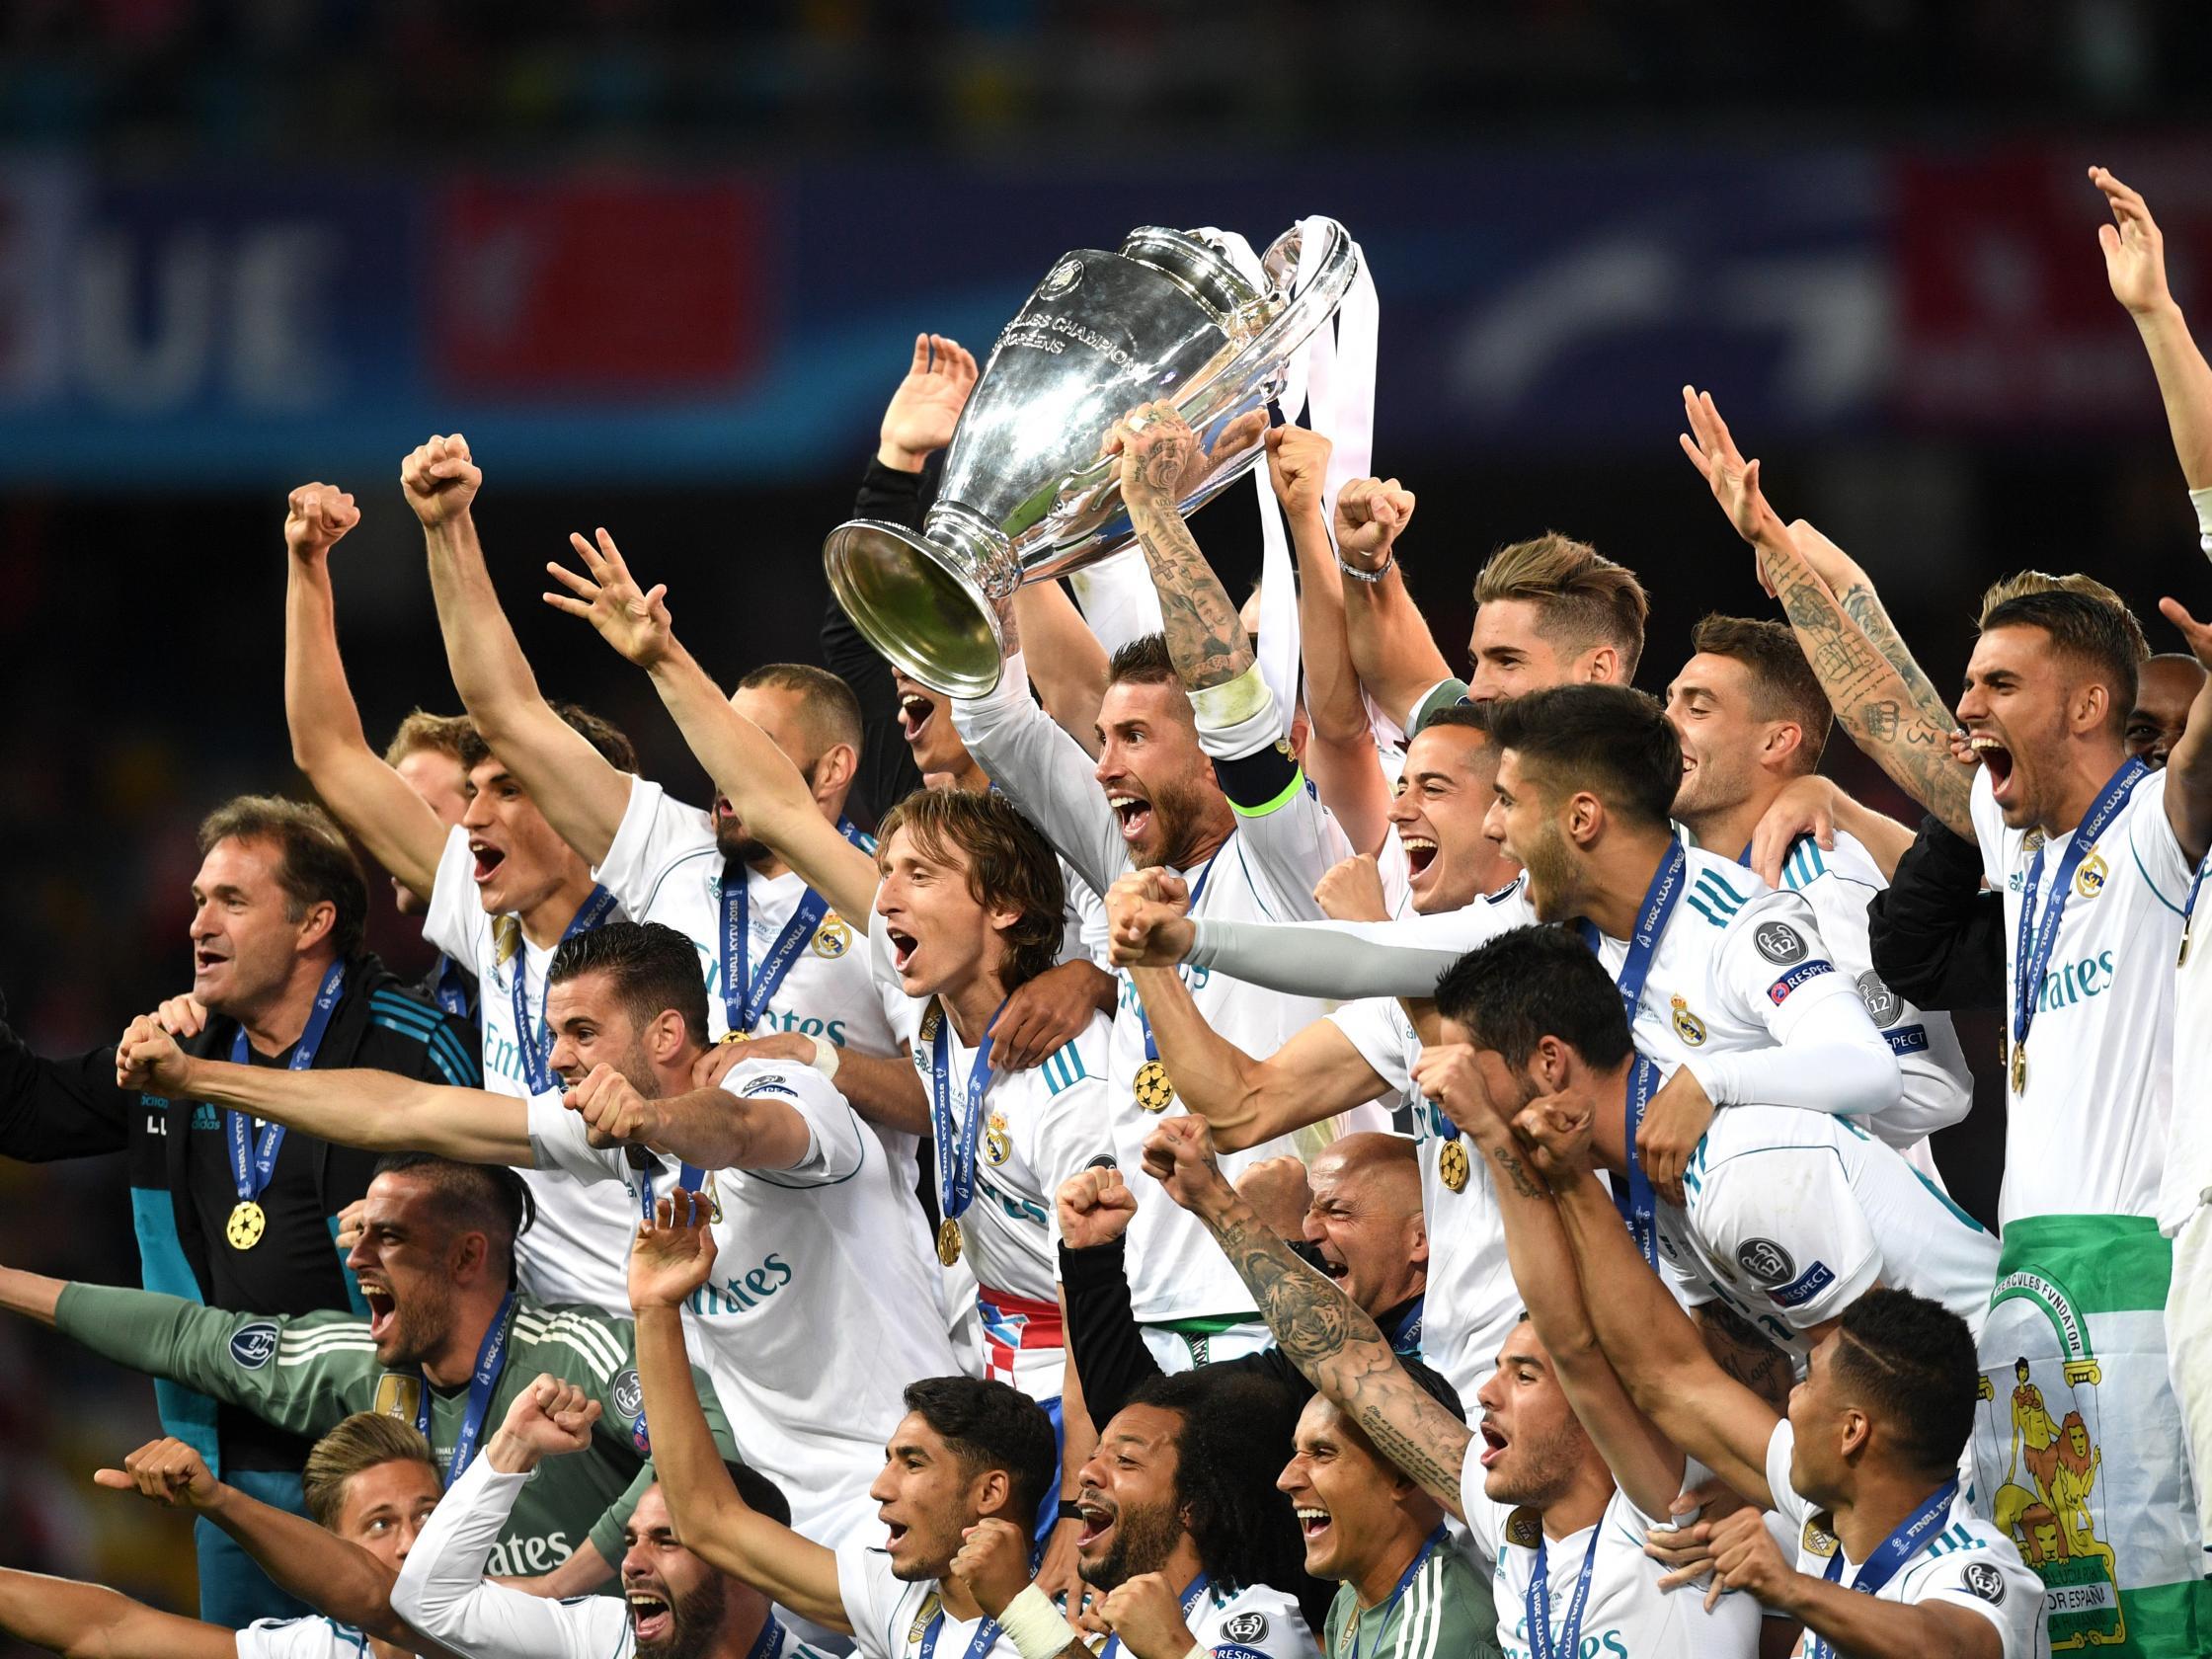 Real Madrid turn it on under the bright lights (Getty Images)